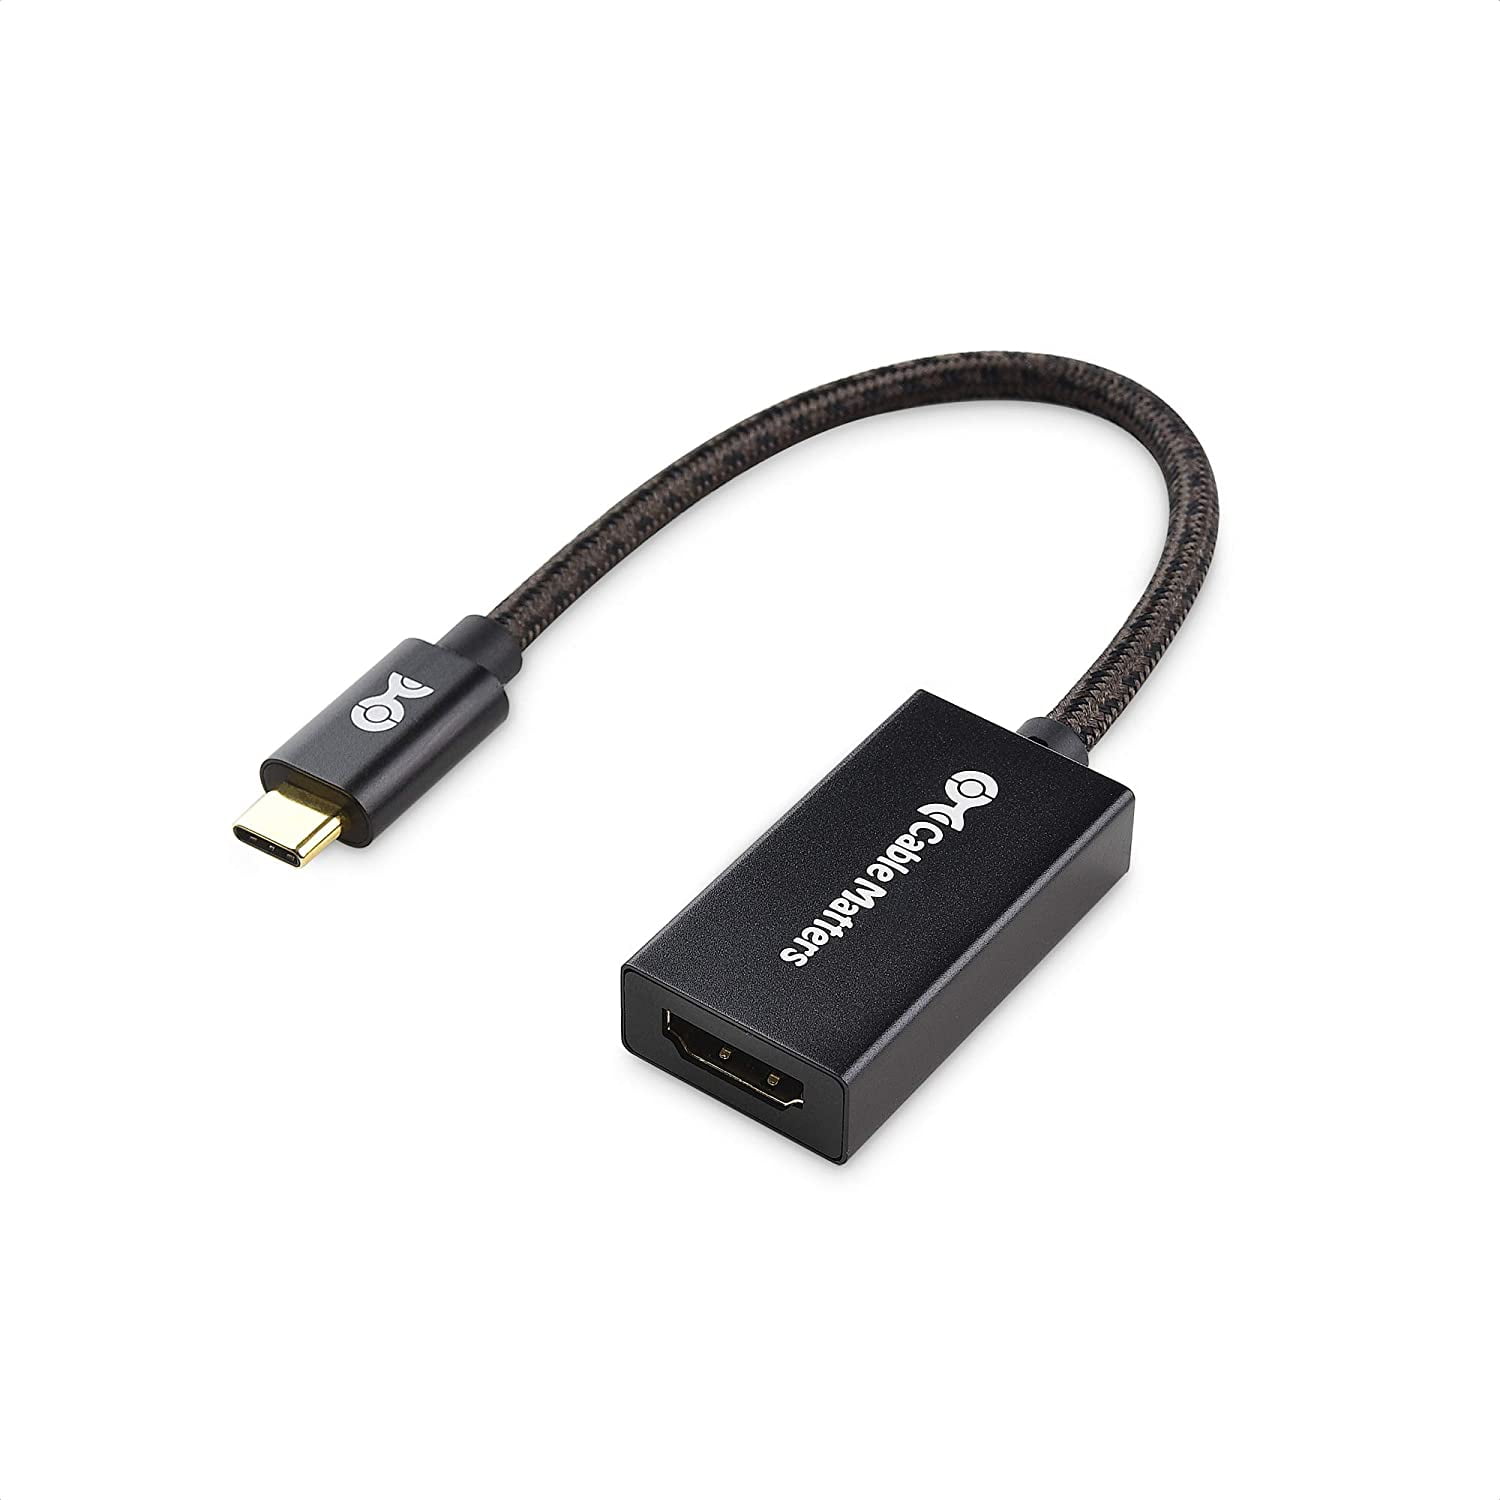 Cable Matters Braided USB C to HDMI 4K Adapter Matte Black for XPS, Surface Pro and More - Support 4K 60Hz, 2K 144Hz HDR - Walmart.com